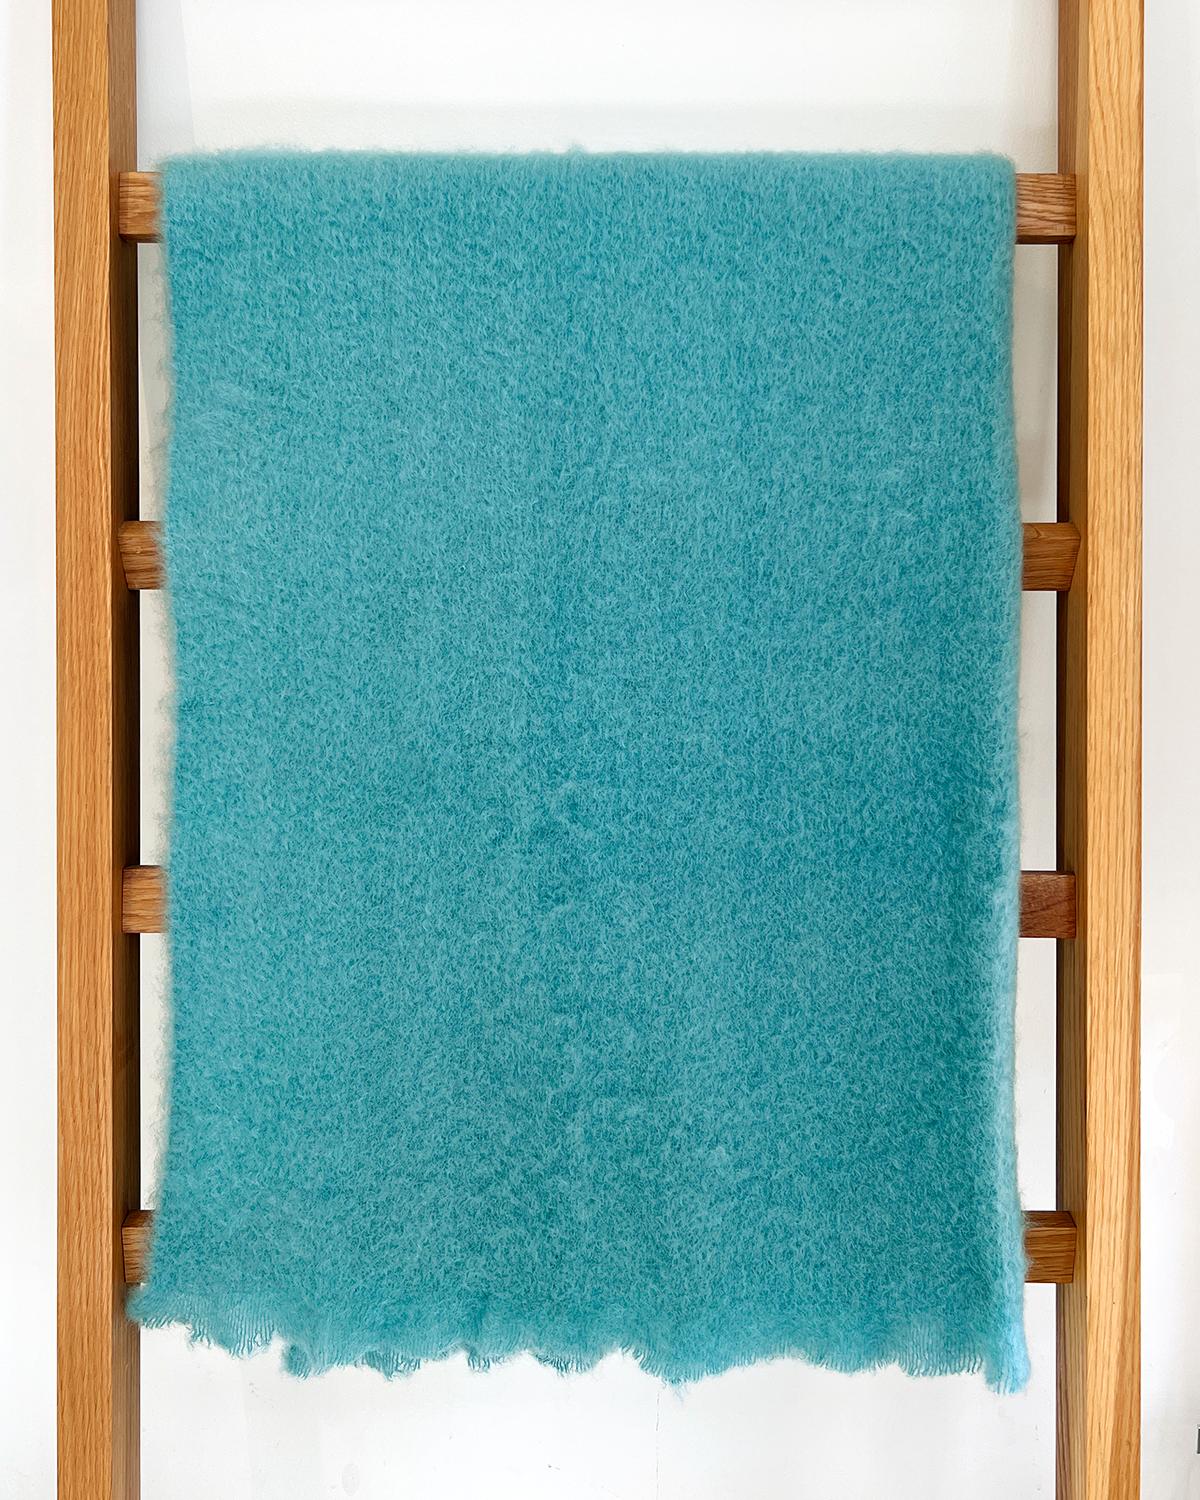 Mohair blankets will keep you cozy and warm this winter. When cold weather happens, wrap yourself up in this beautiful Aquamarine Mohair Throw and stay cozy. This beautiful blue/green color will light up the room and add a pop of color and